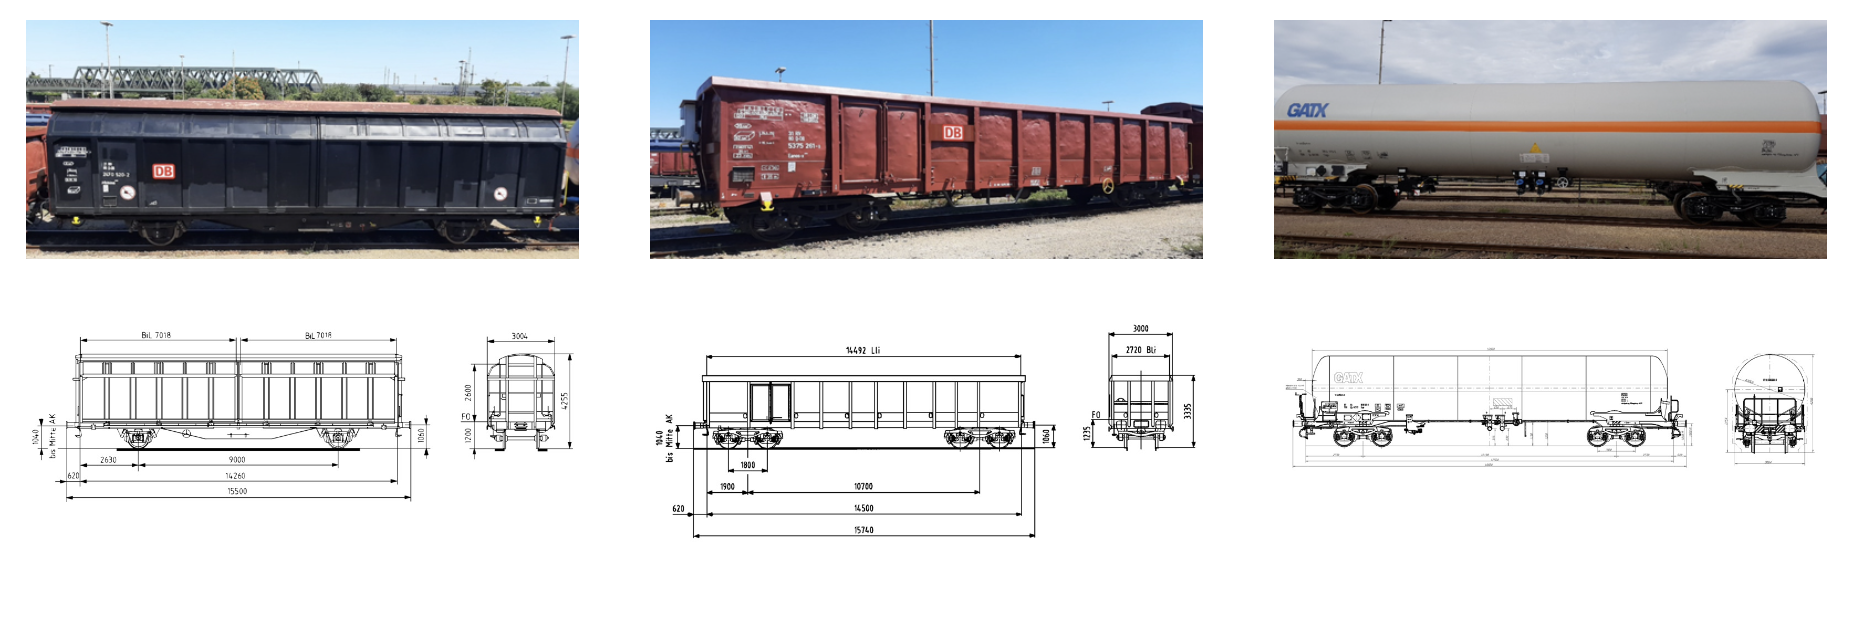 Railcars used for the digital coupling trials (from left to right): Hbbins 306 two-axle boxcar, Eanos-x 059 four-axle gondola car, Zags 119 four-axle tank wagon (enlarge)